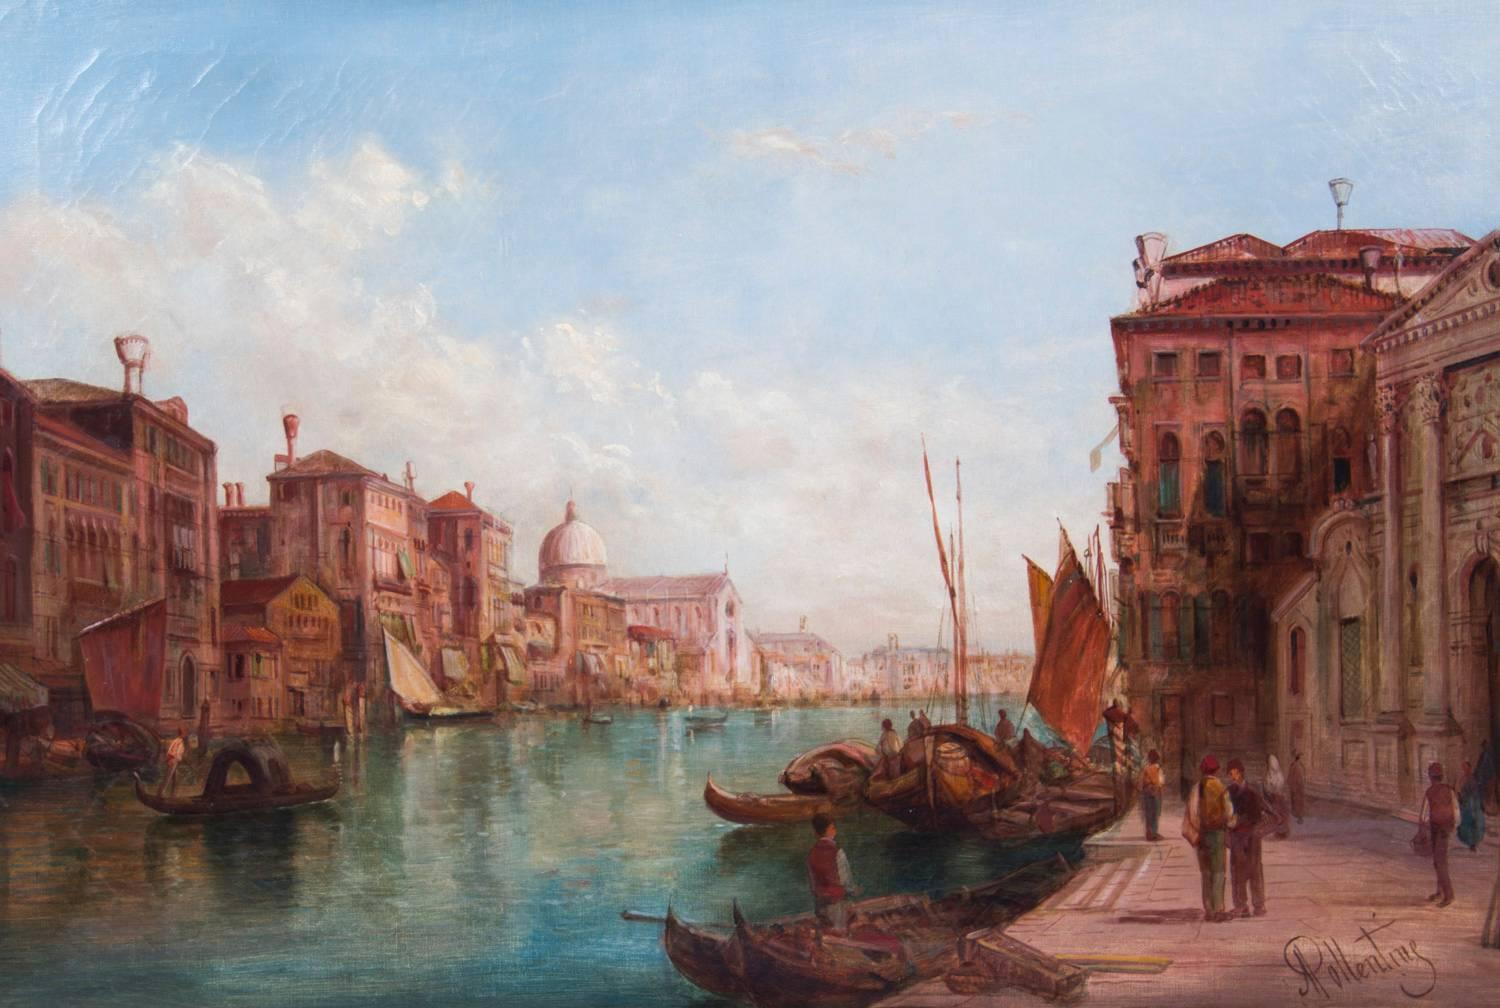 This is a beautiful oil on canvas painting of the view of the Grand Canal in Venice by the renowned British artist Alfred Pollentine (1836-1890) and signed lower right 